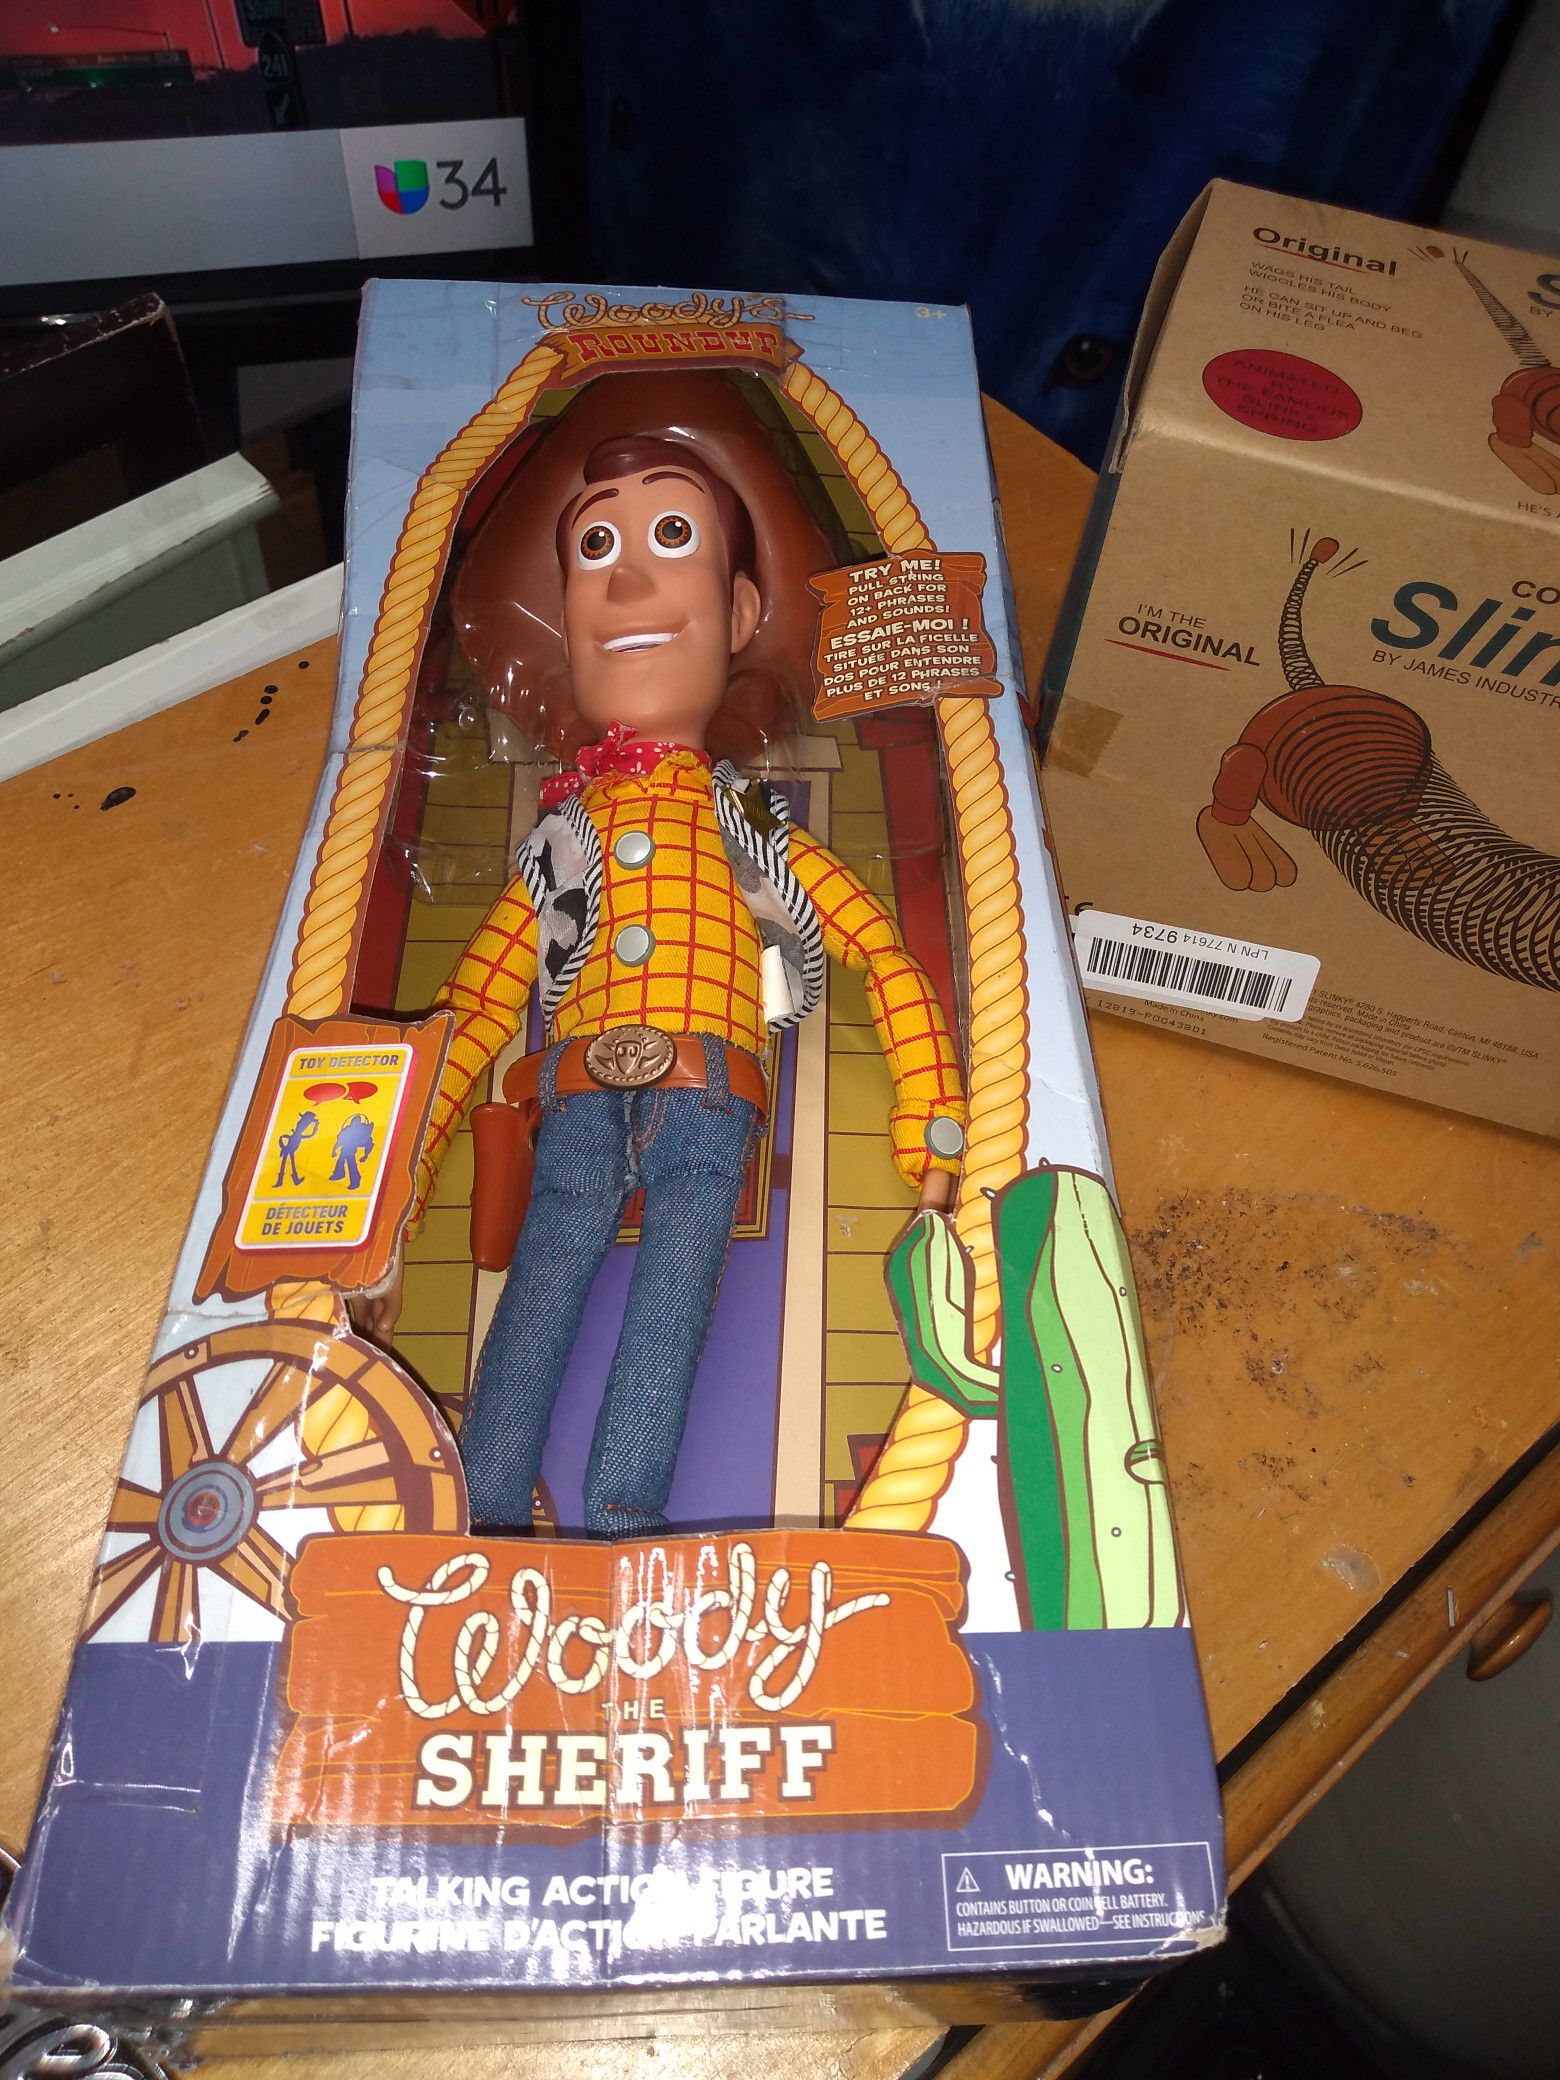 Woody toy's story.